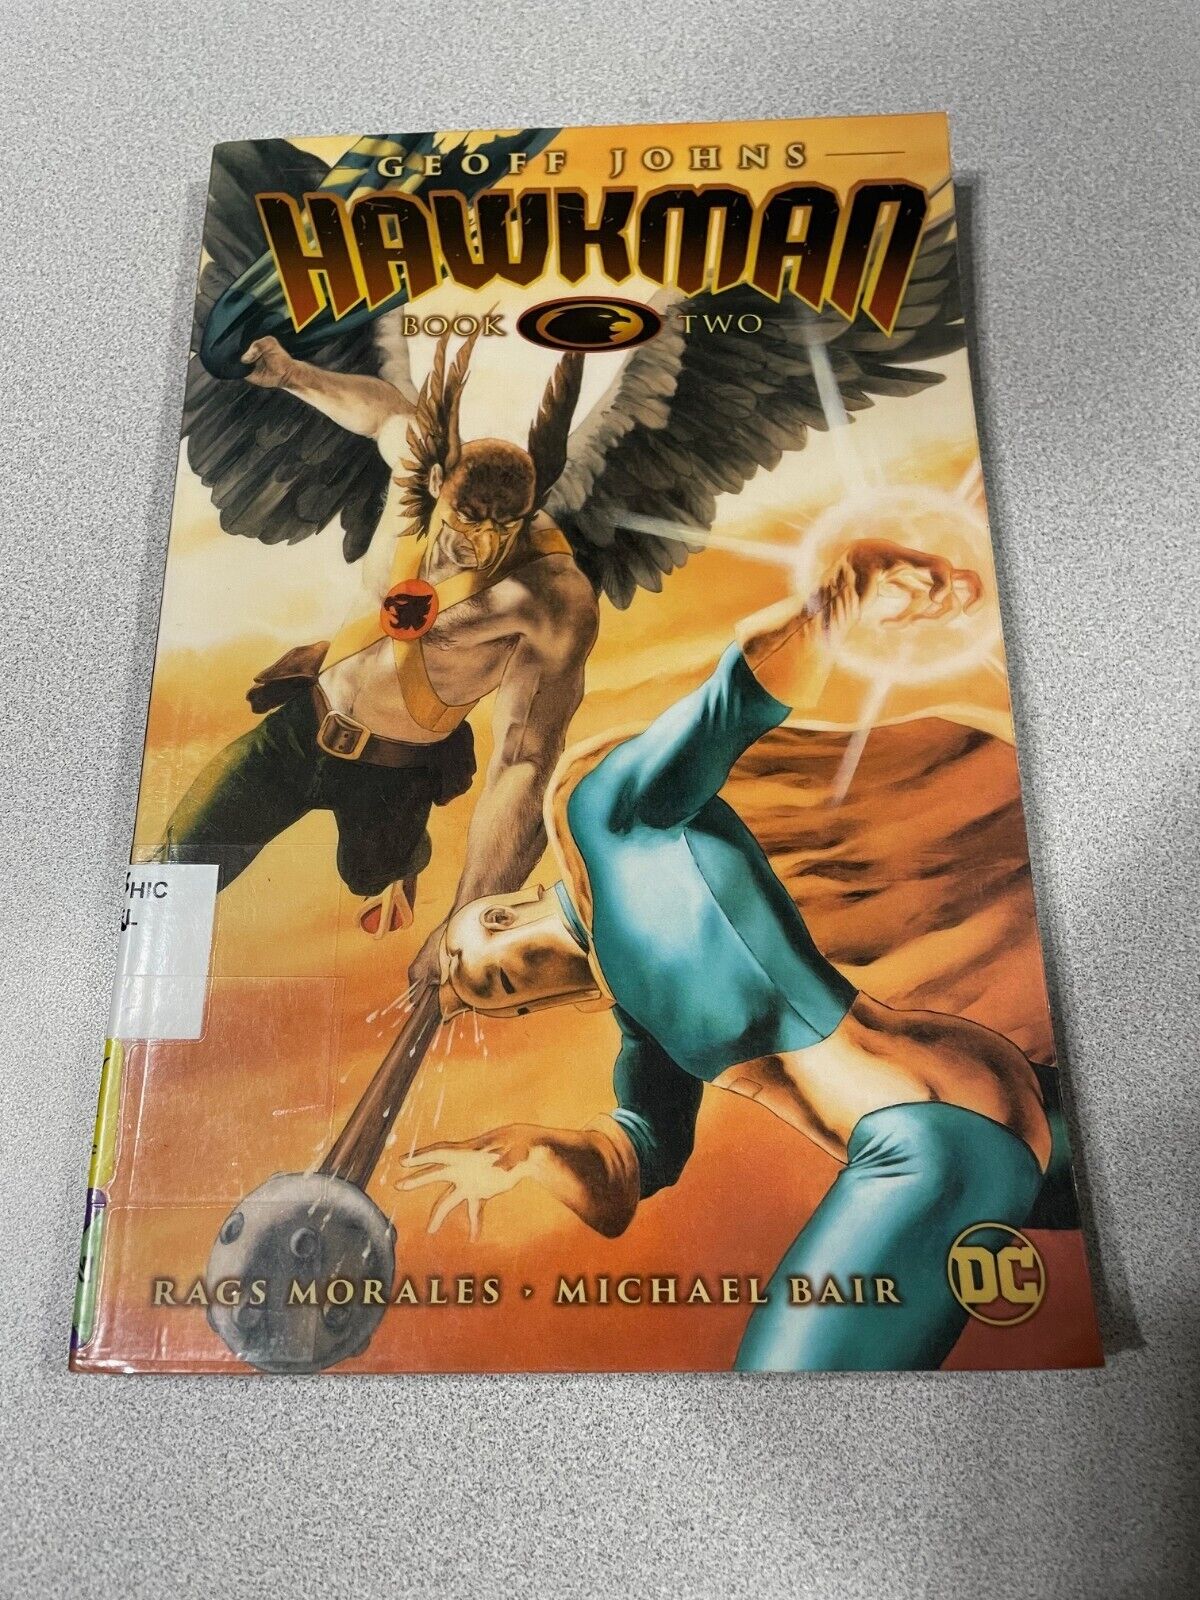 Hawkman by Geoff Johns Book Two Rags Morales Michael Bair